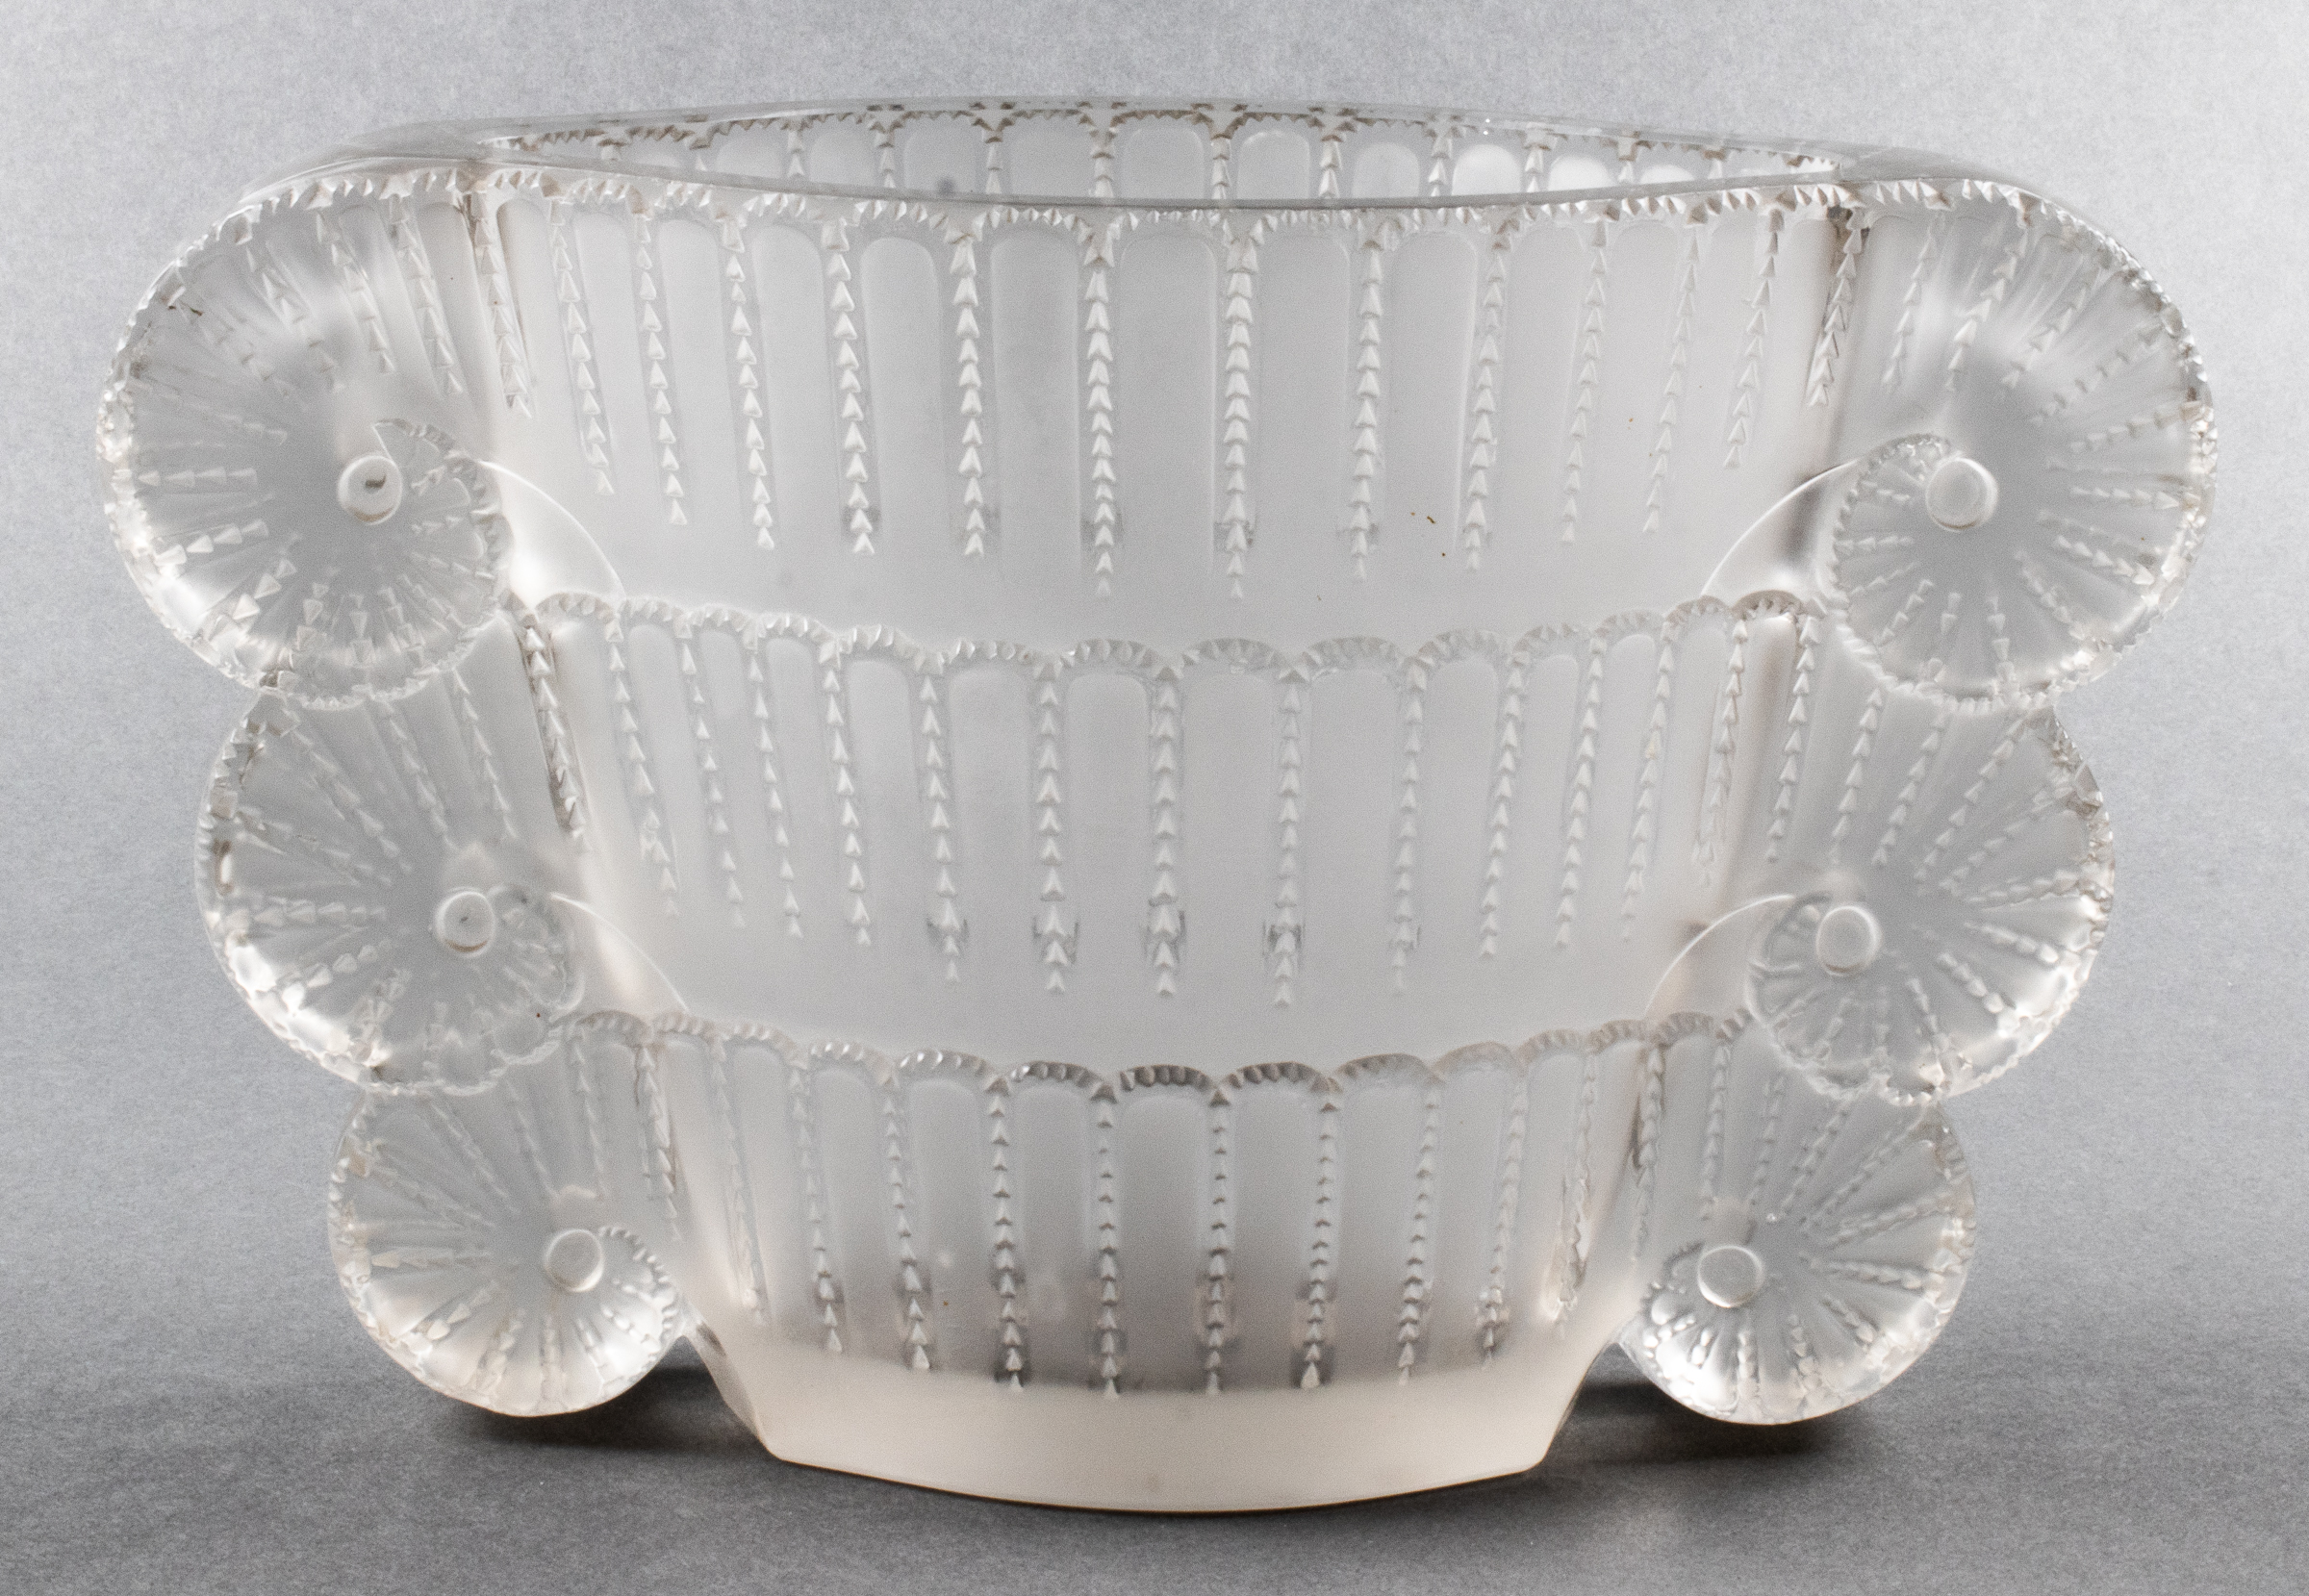 R LALIQUE JAFFA FROSTED ART 3c32ed